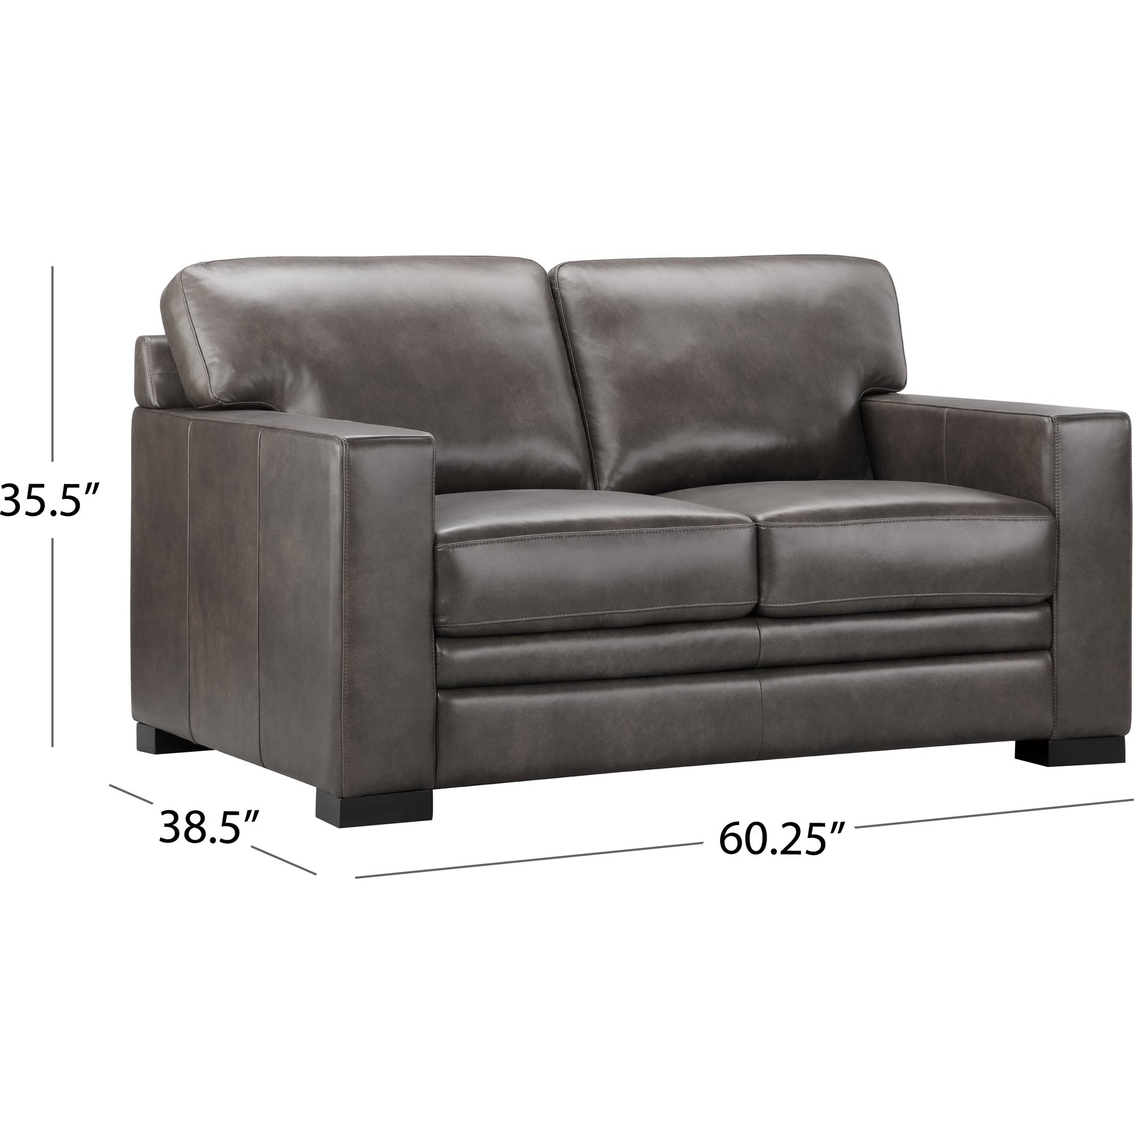 Abbyson Augusta Top Grain Leather Sofa And Loveseat 2 Pc. Set | Living ...